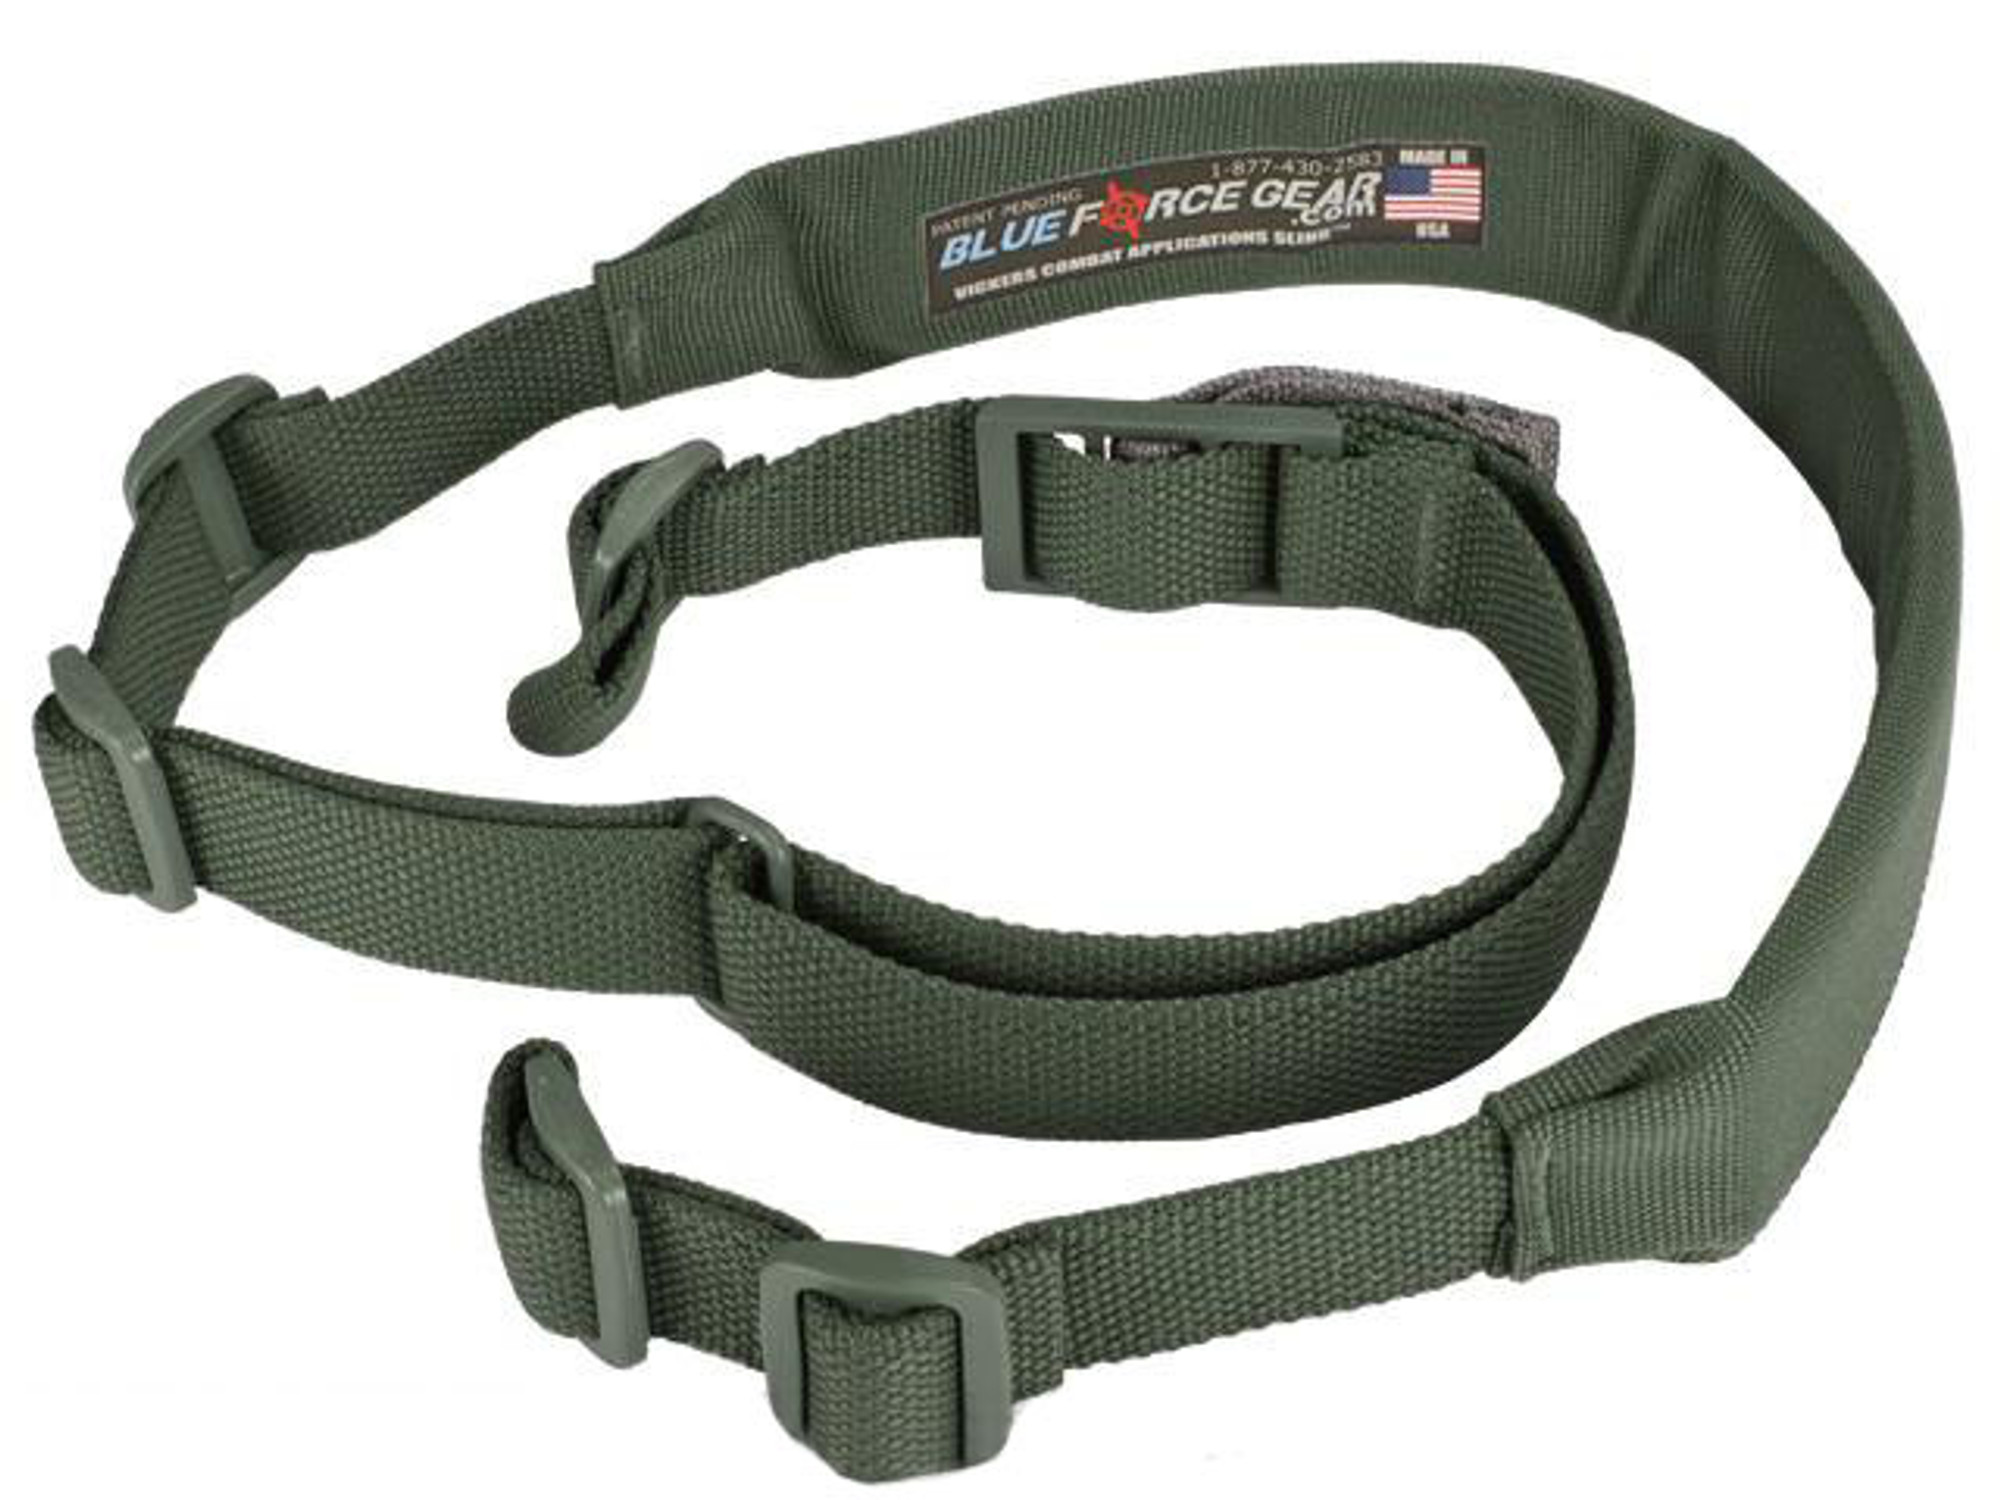 Blue Force Gear 2 Point Padded Vickers Combat Applications Sling - OD Green